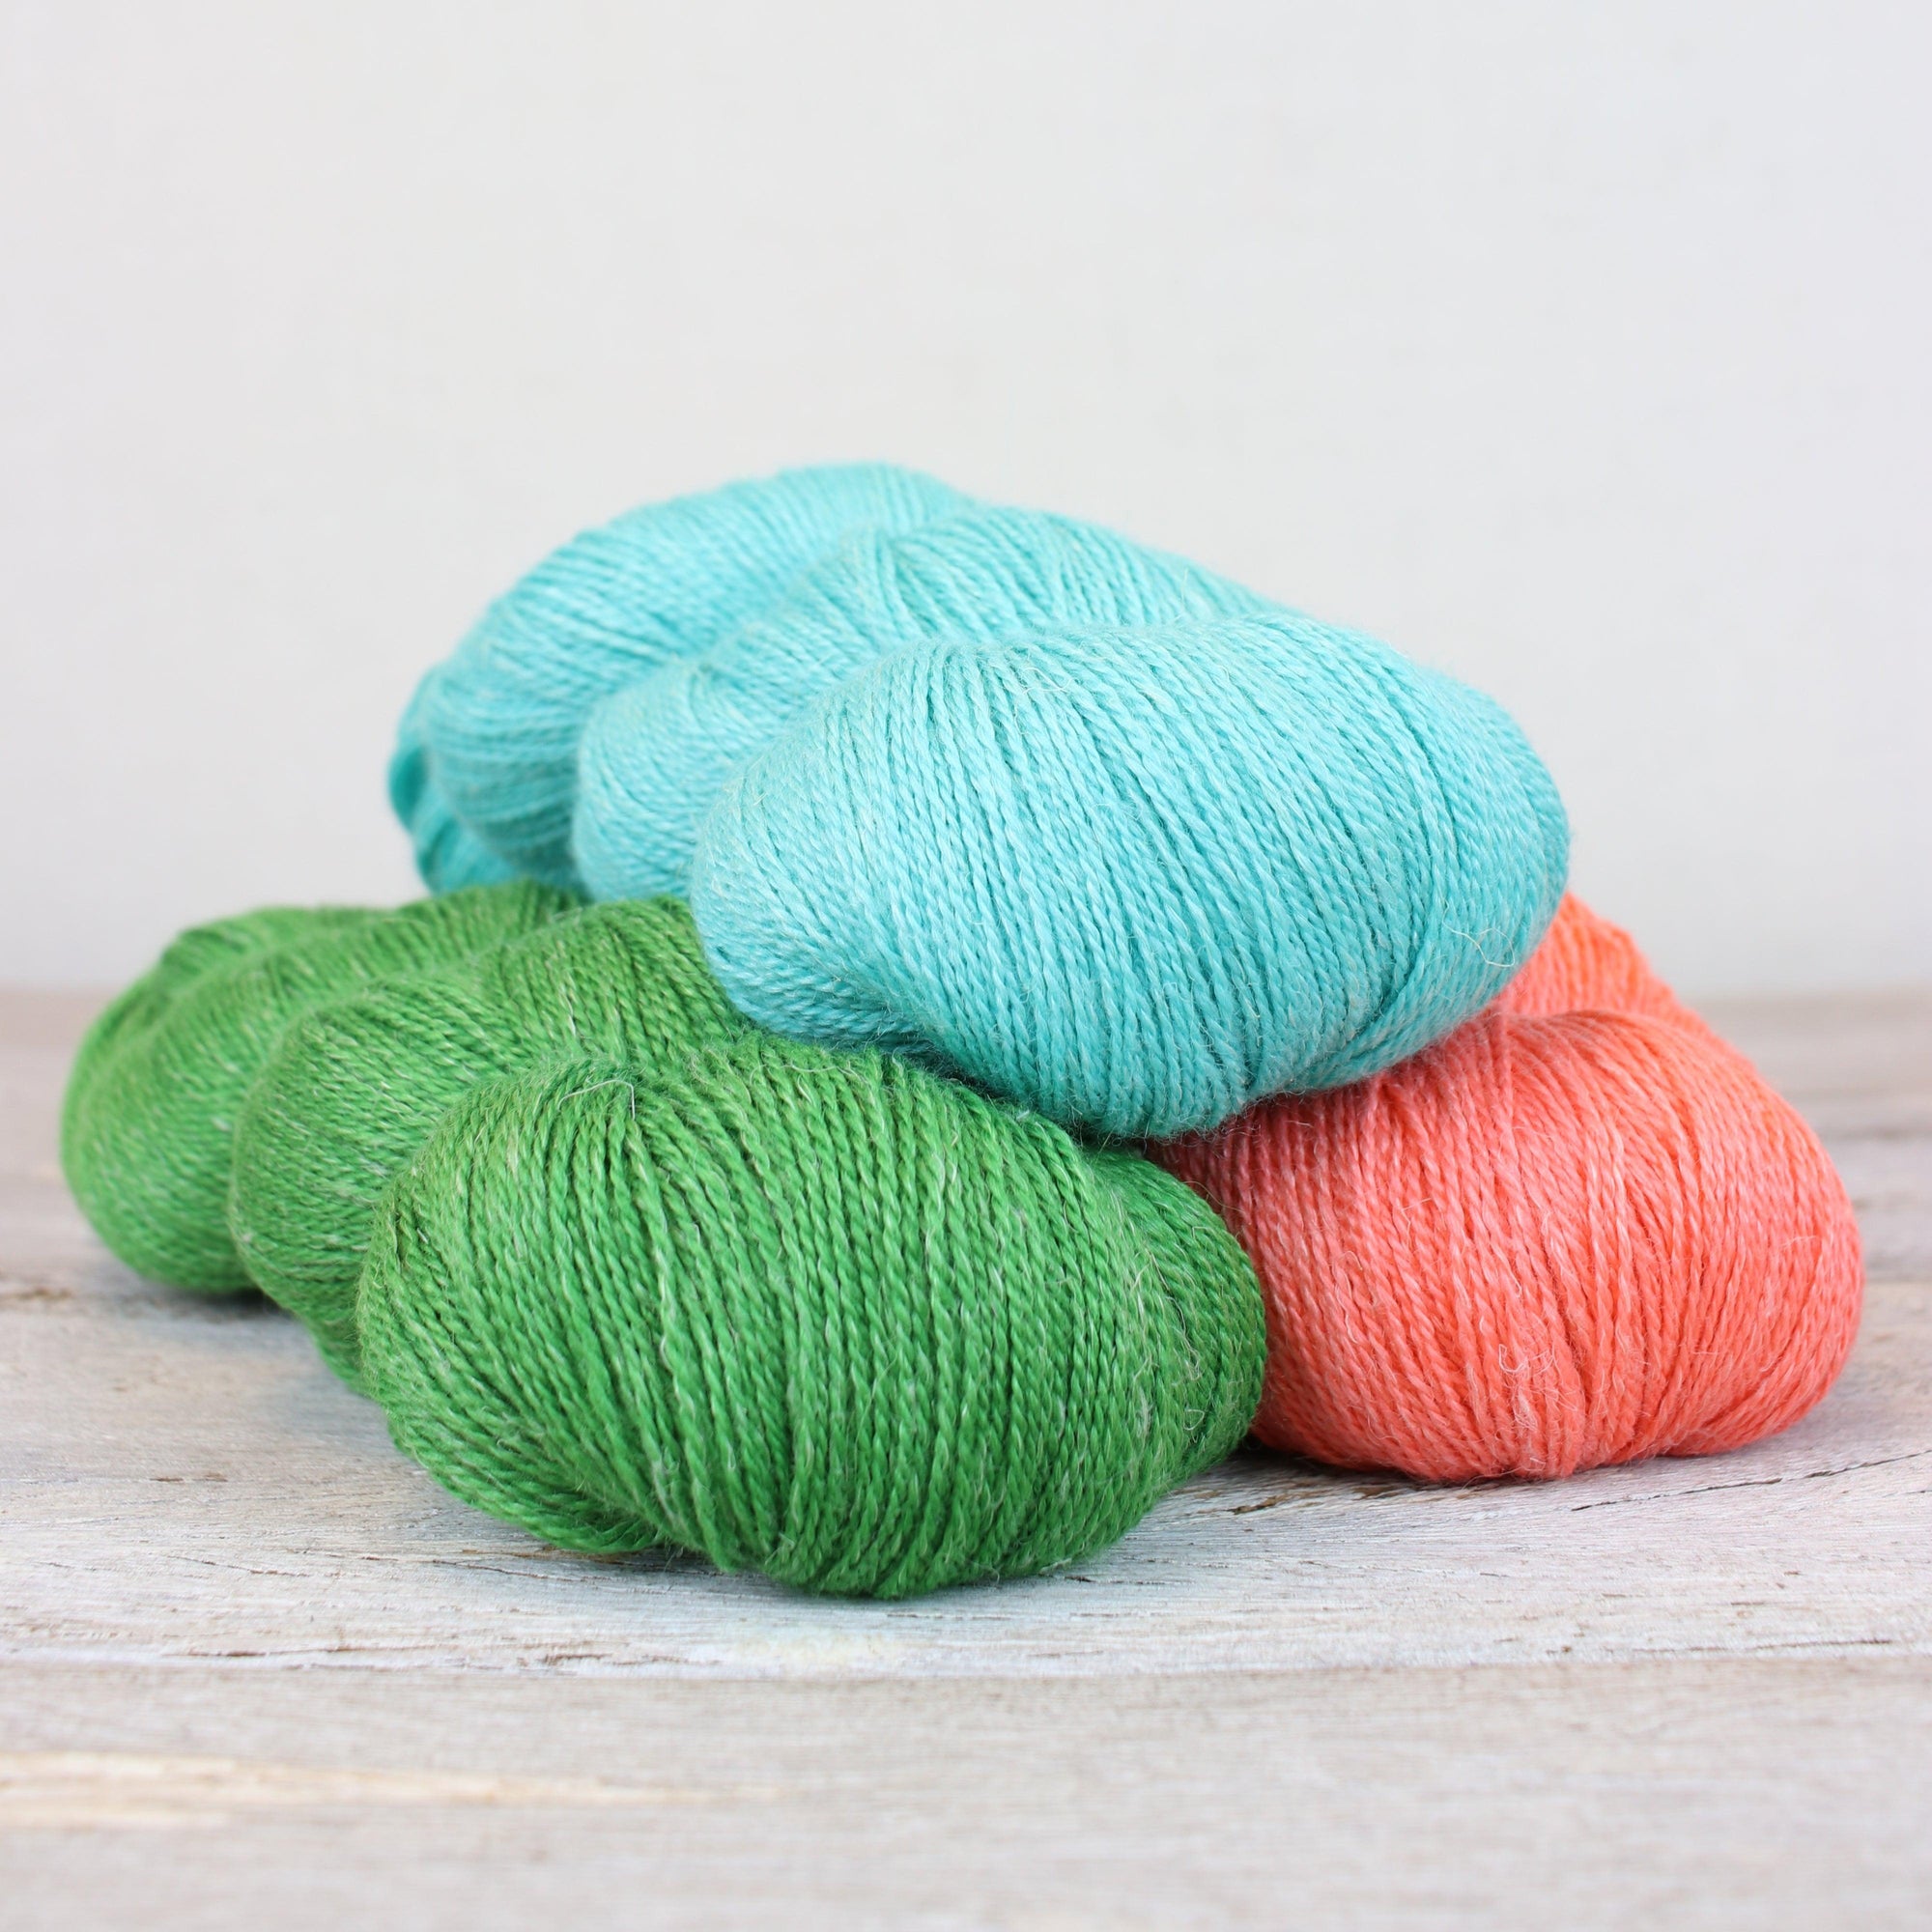 The Fibre Co. The Fibre Co. Meadow -  - Lace Knitting Yarn